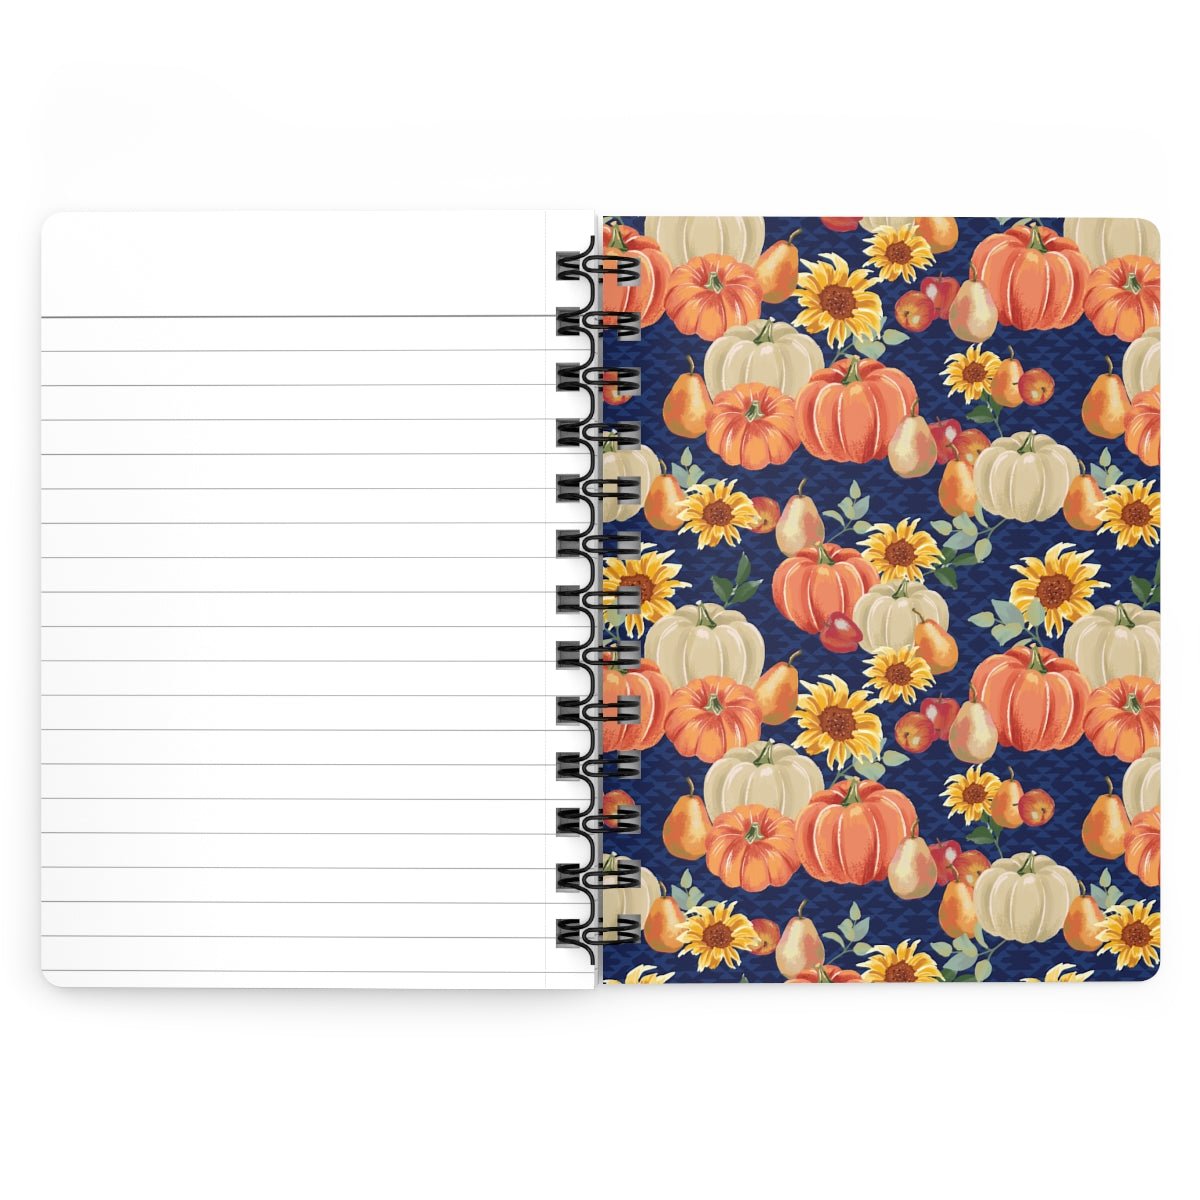 Fall Pumpkins and Sunflowers Spiral Bound Journal - Puffin Lime